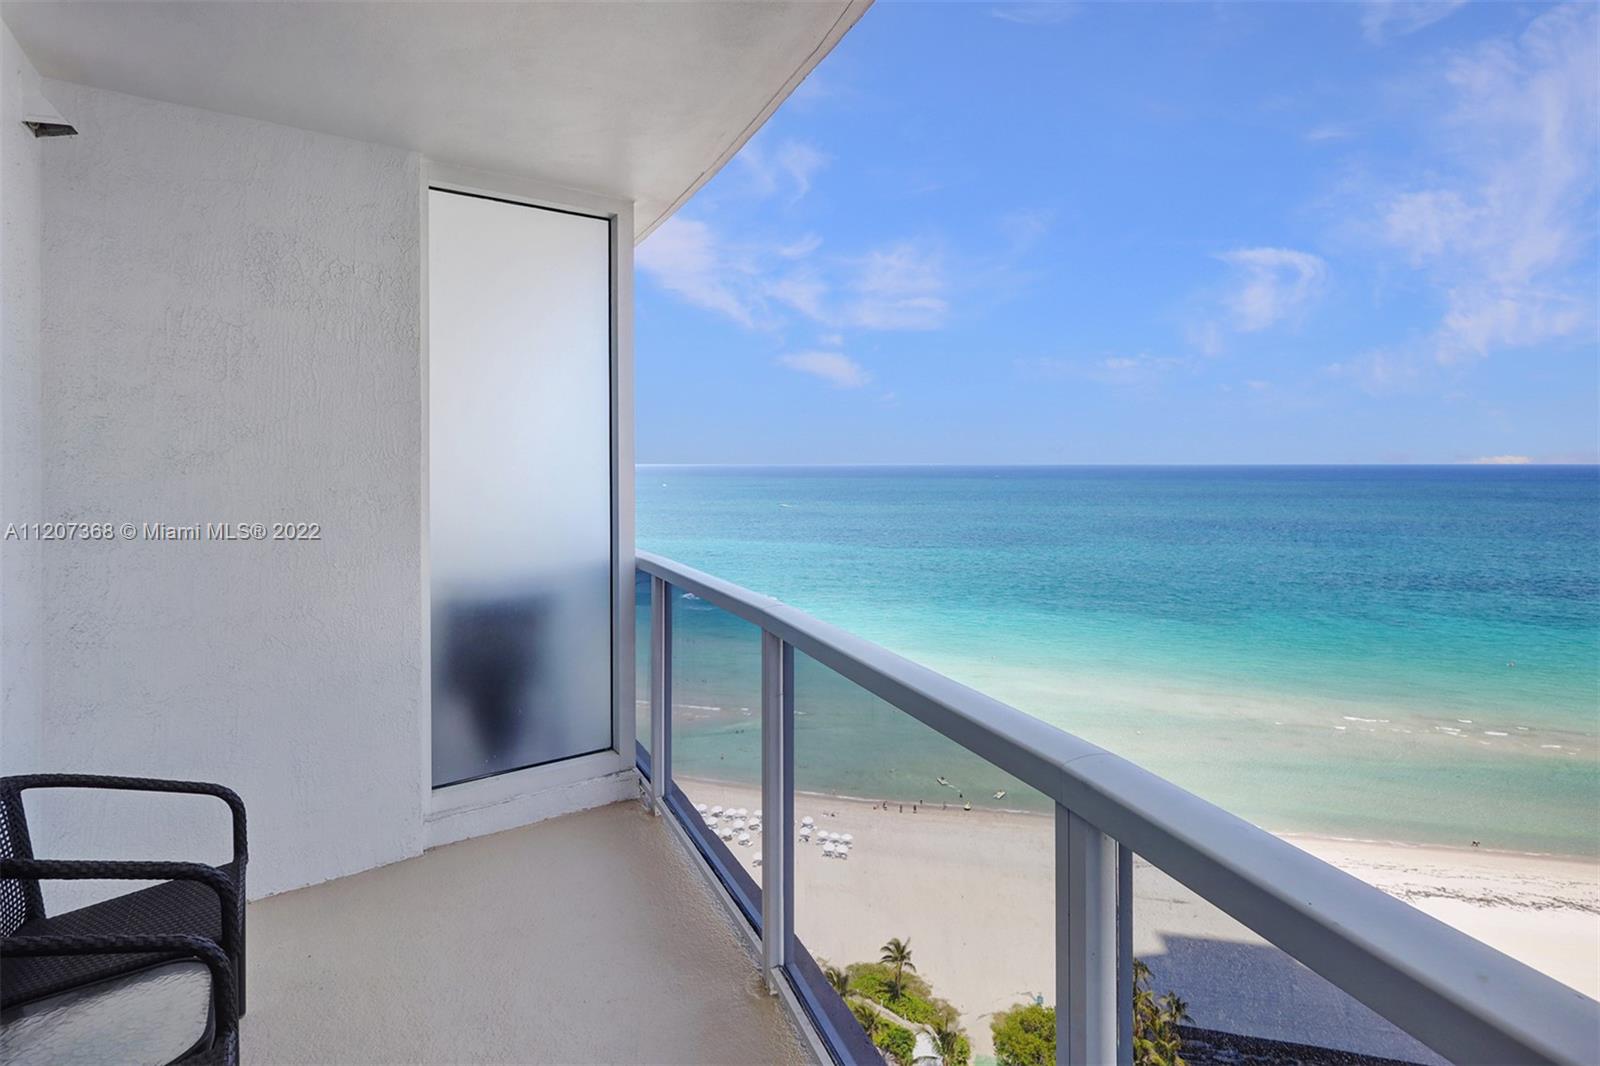 18001  Collins Ave #2012 For Sale A11207368, FL